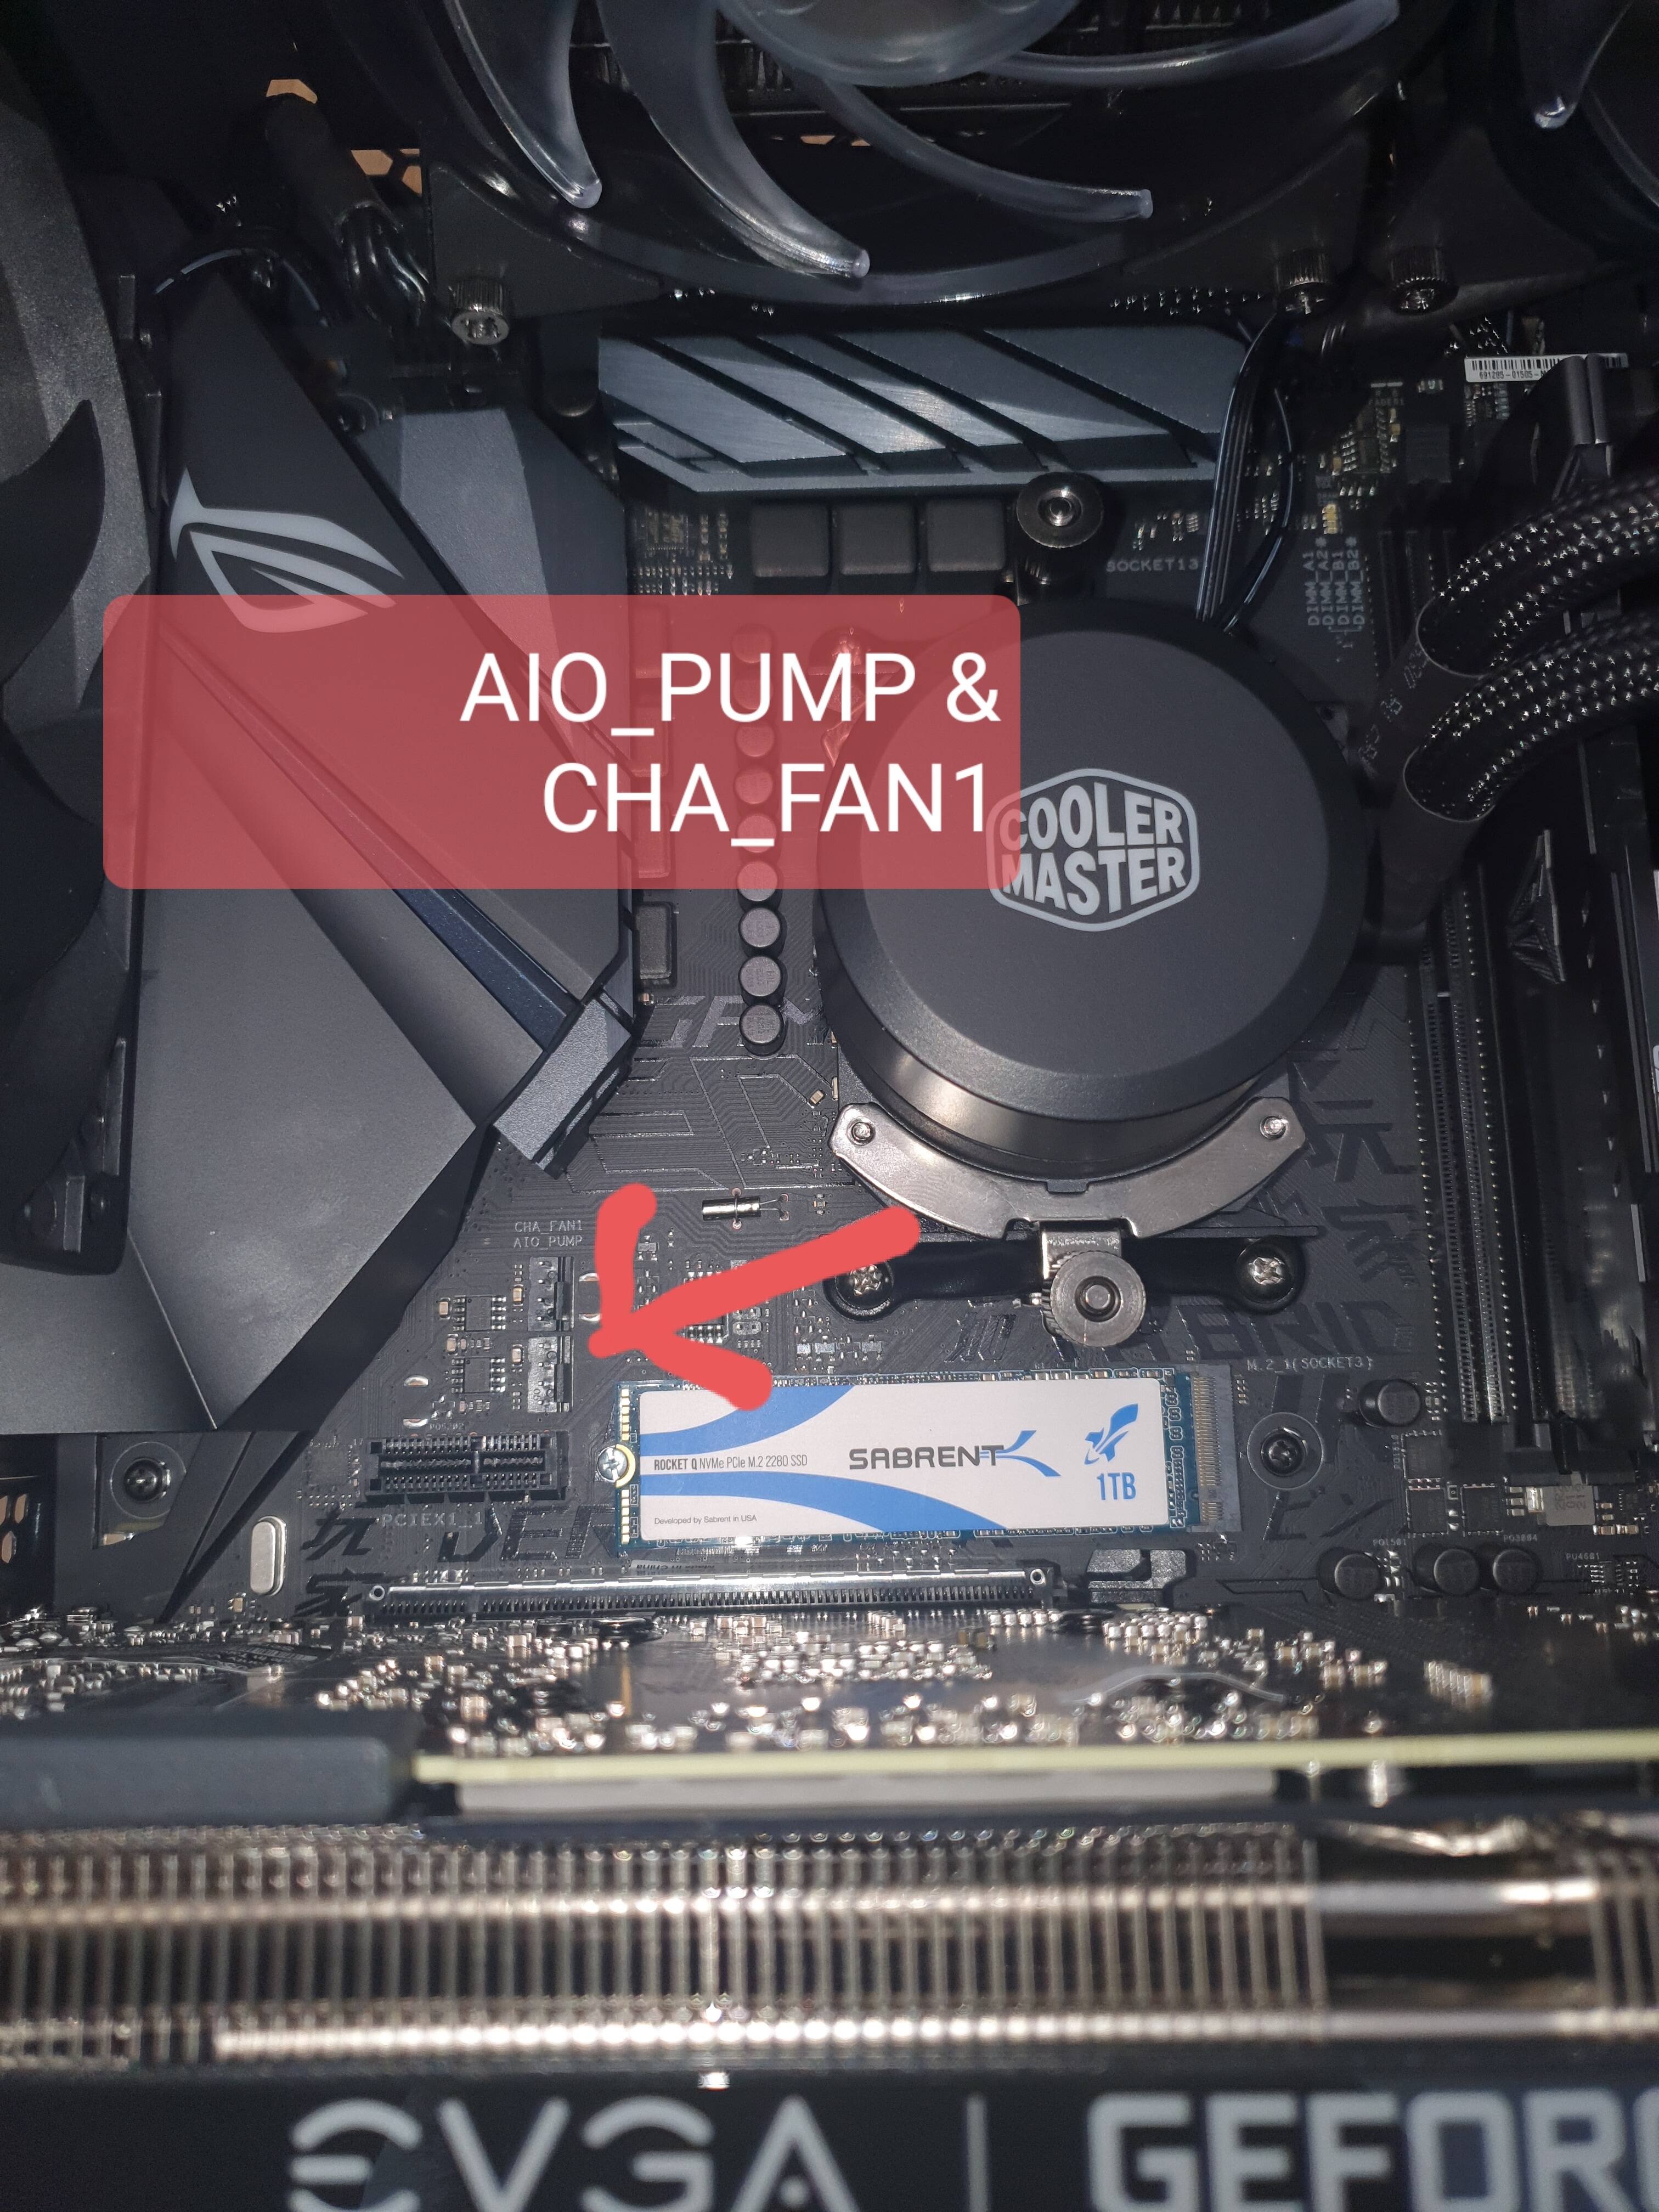 hi has anyone got advice on CPU fan header or AIO header - CPUs,  Motherboards, and Memory - Linus Tech Tips